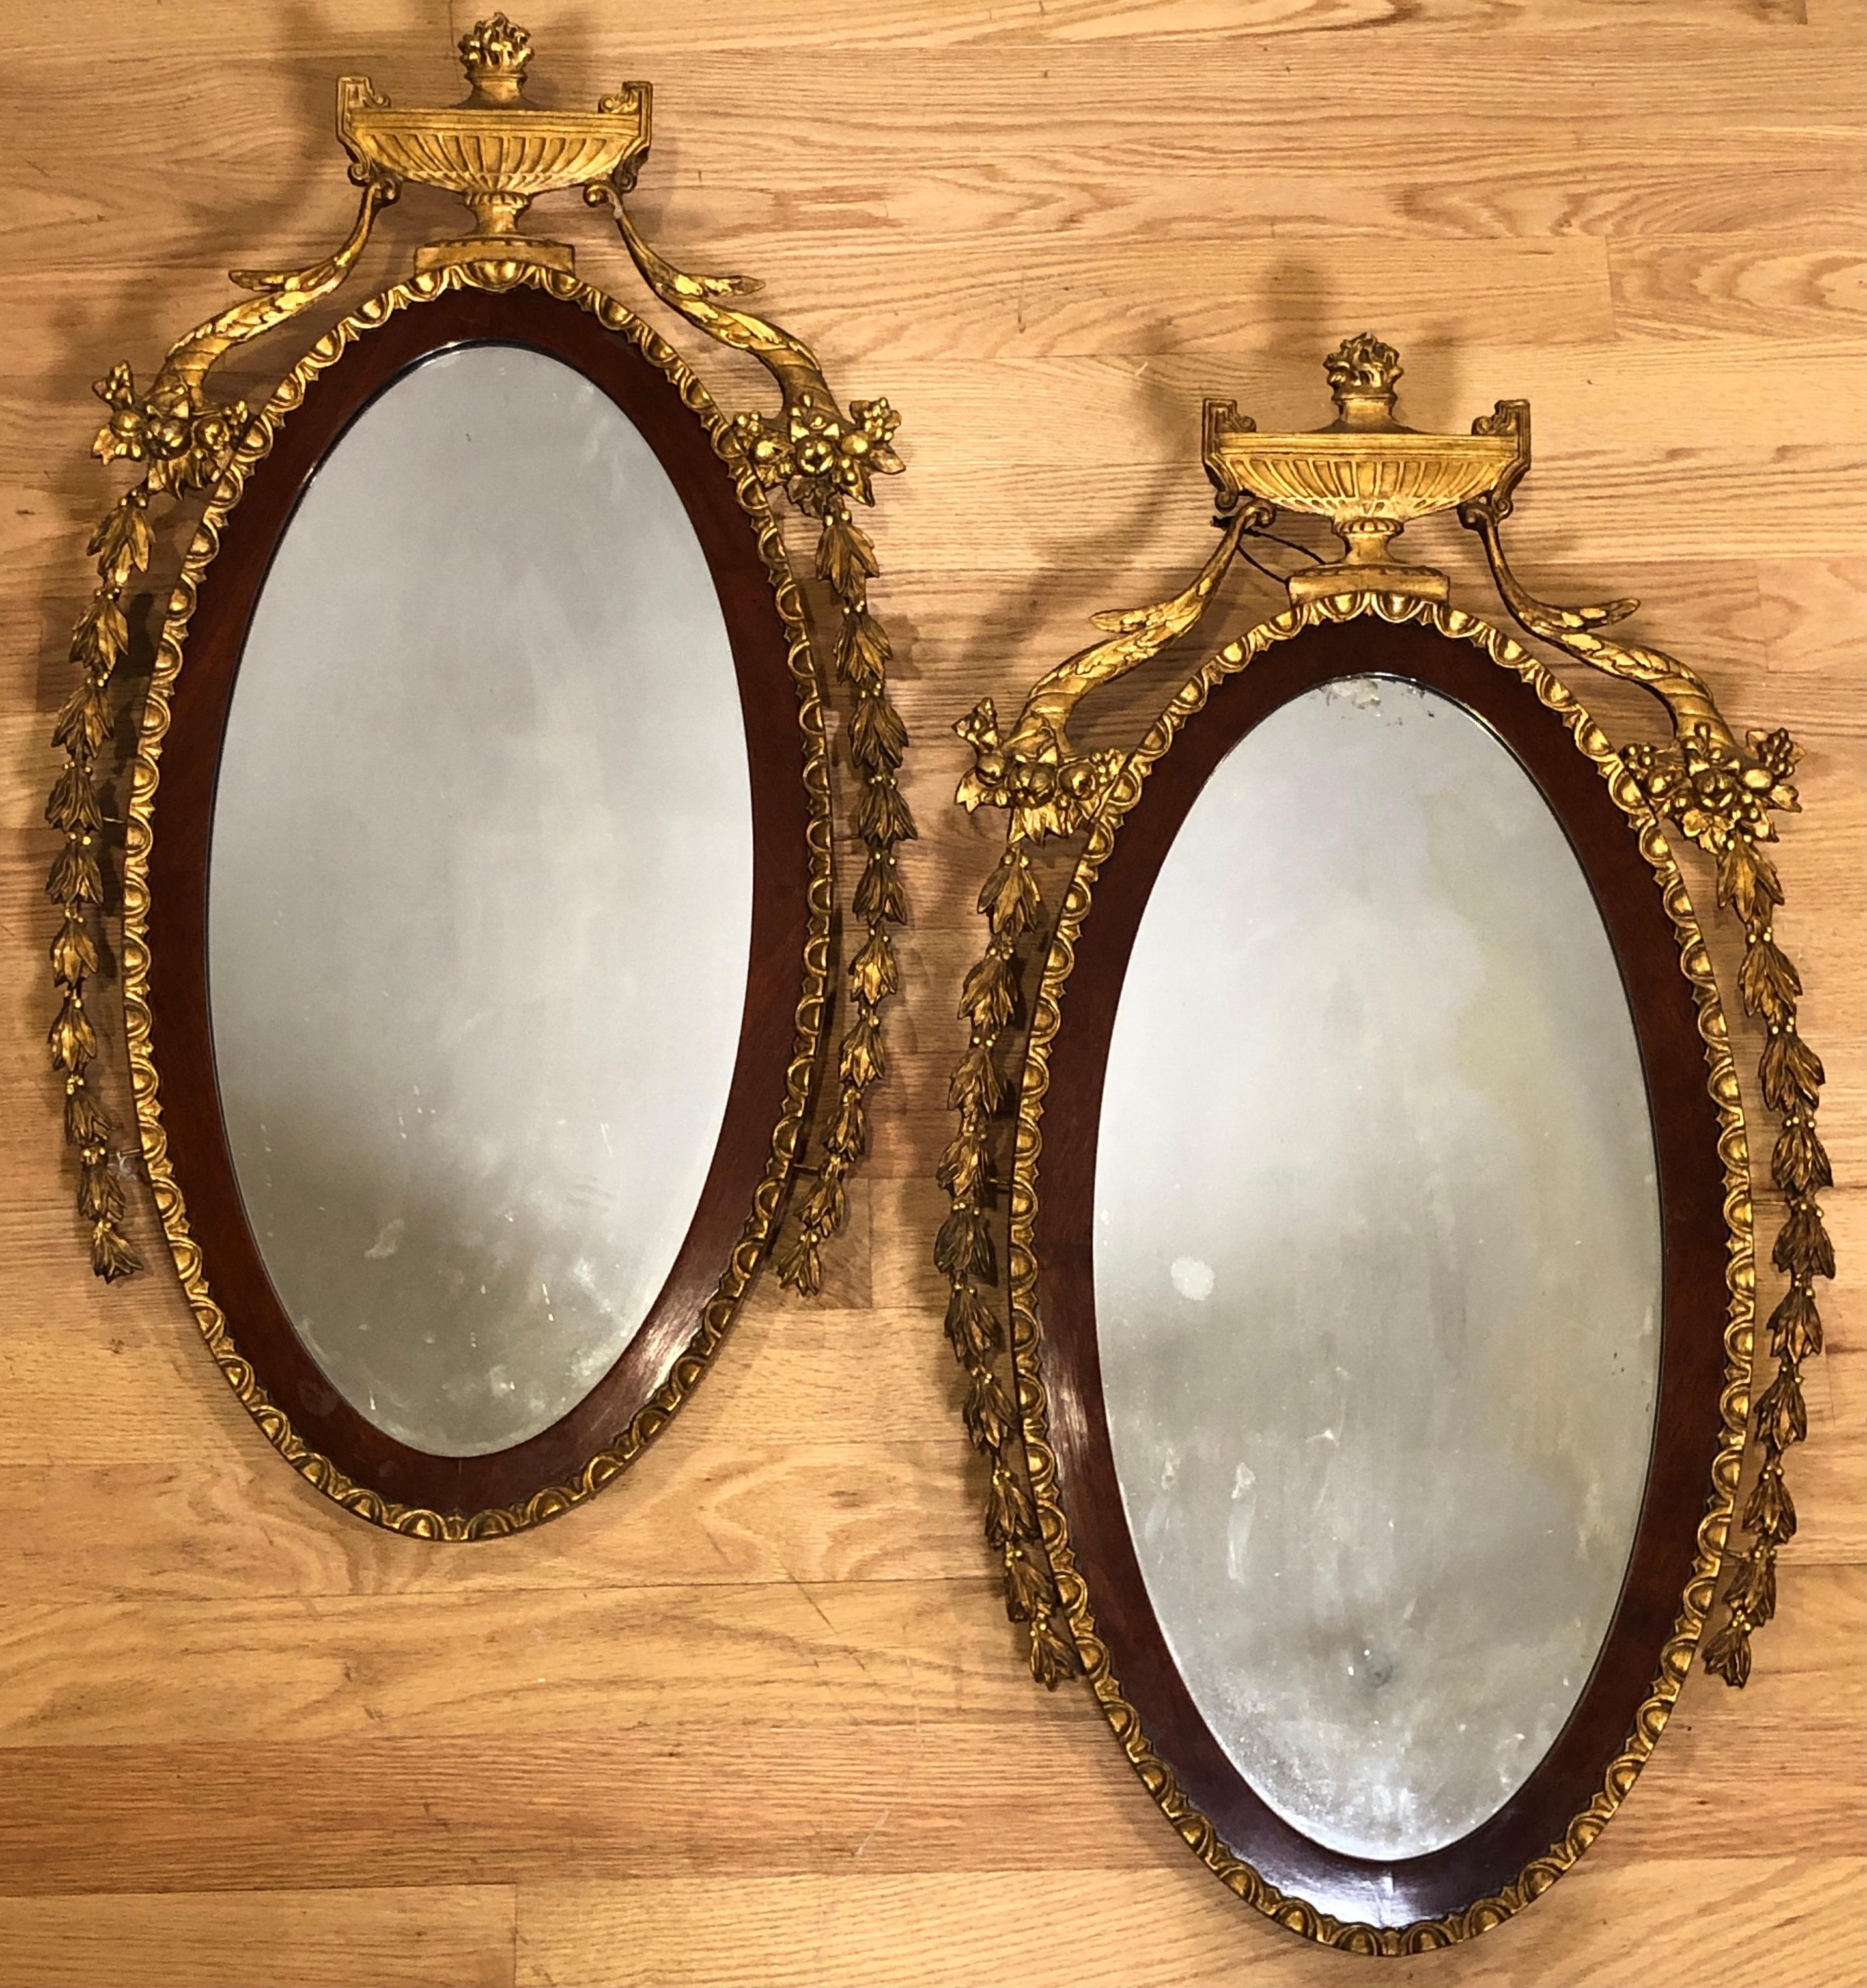 Matched pair of 19th century Adam style giltwood and mahogany mirrors. Centered urns, laurel leaves and cornucopia elements.